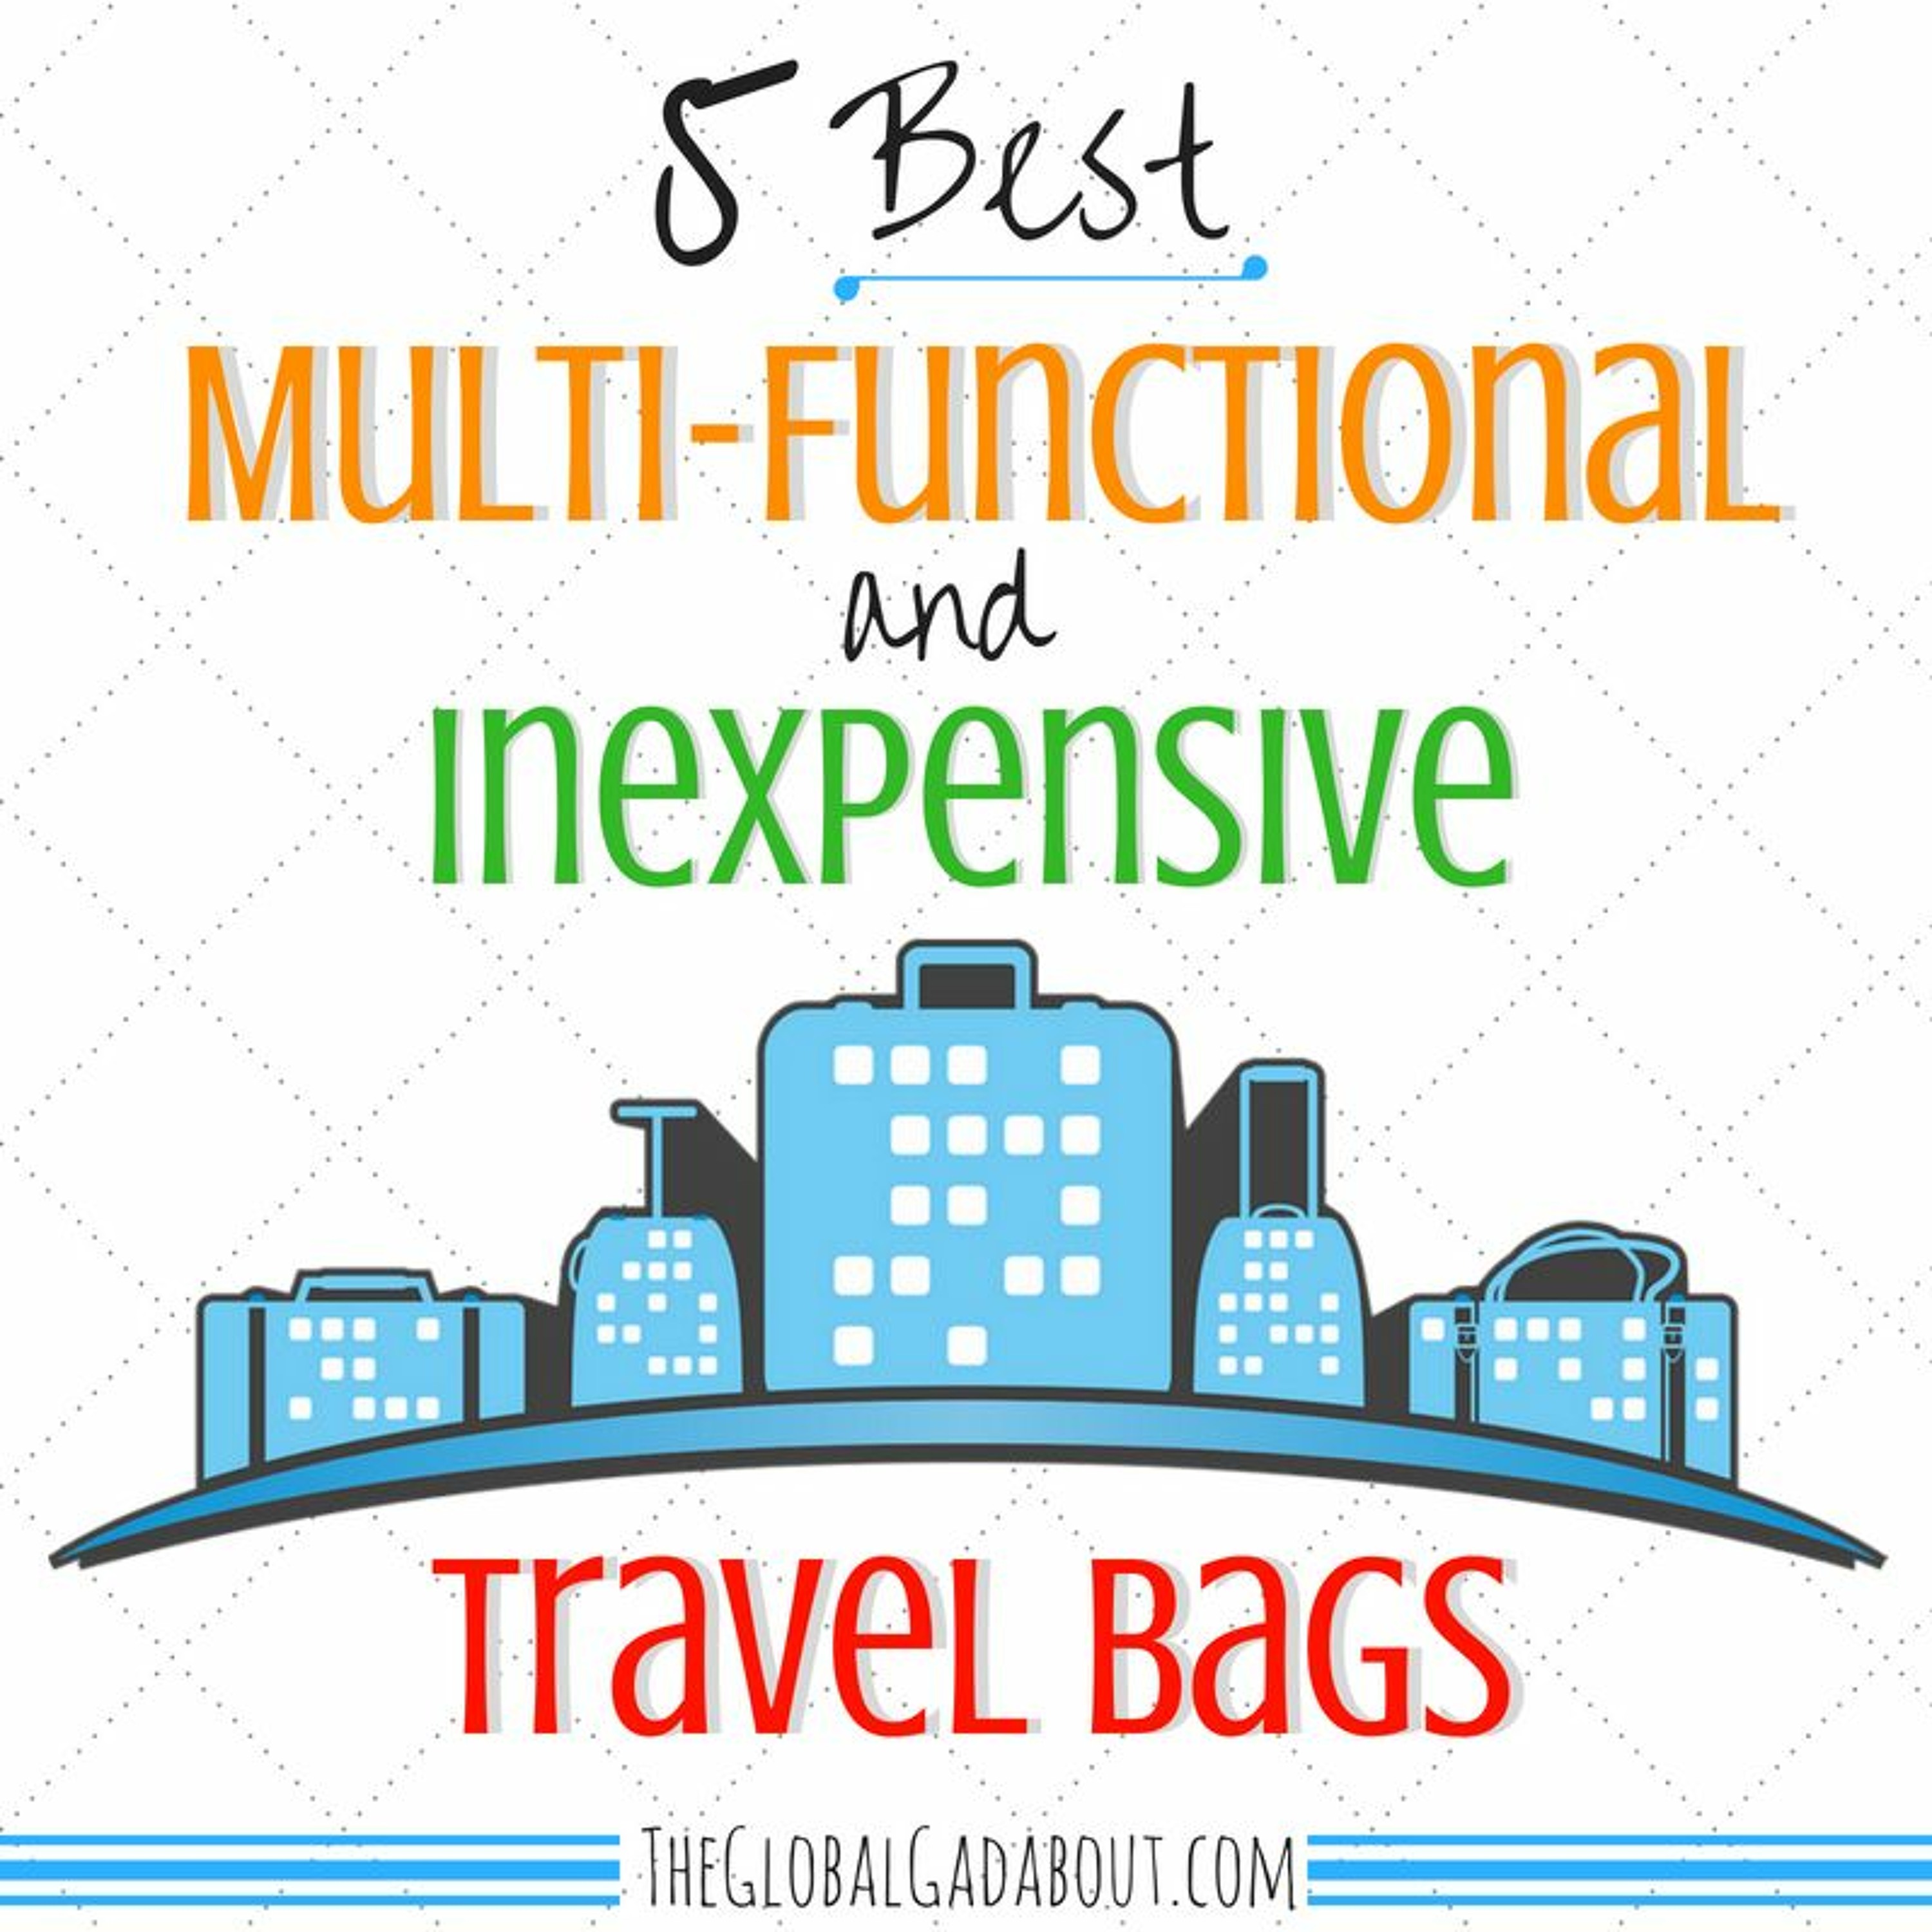 5 Best Multi - Functional & Inexpensive Travel Bags